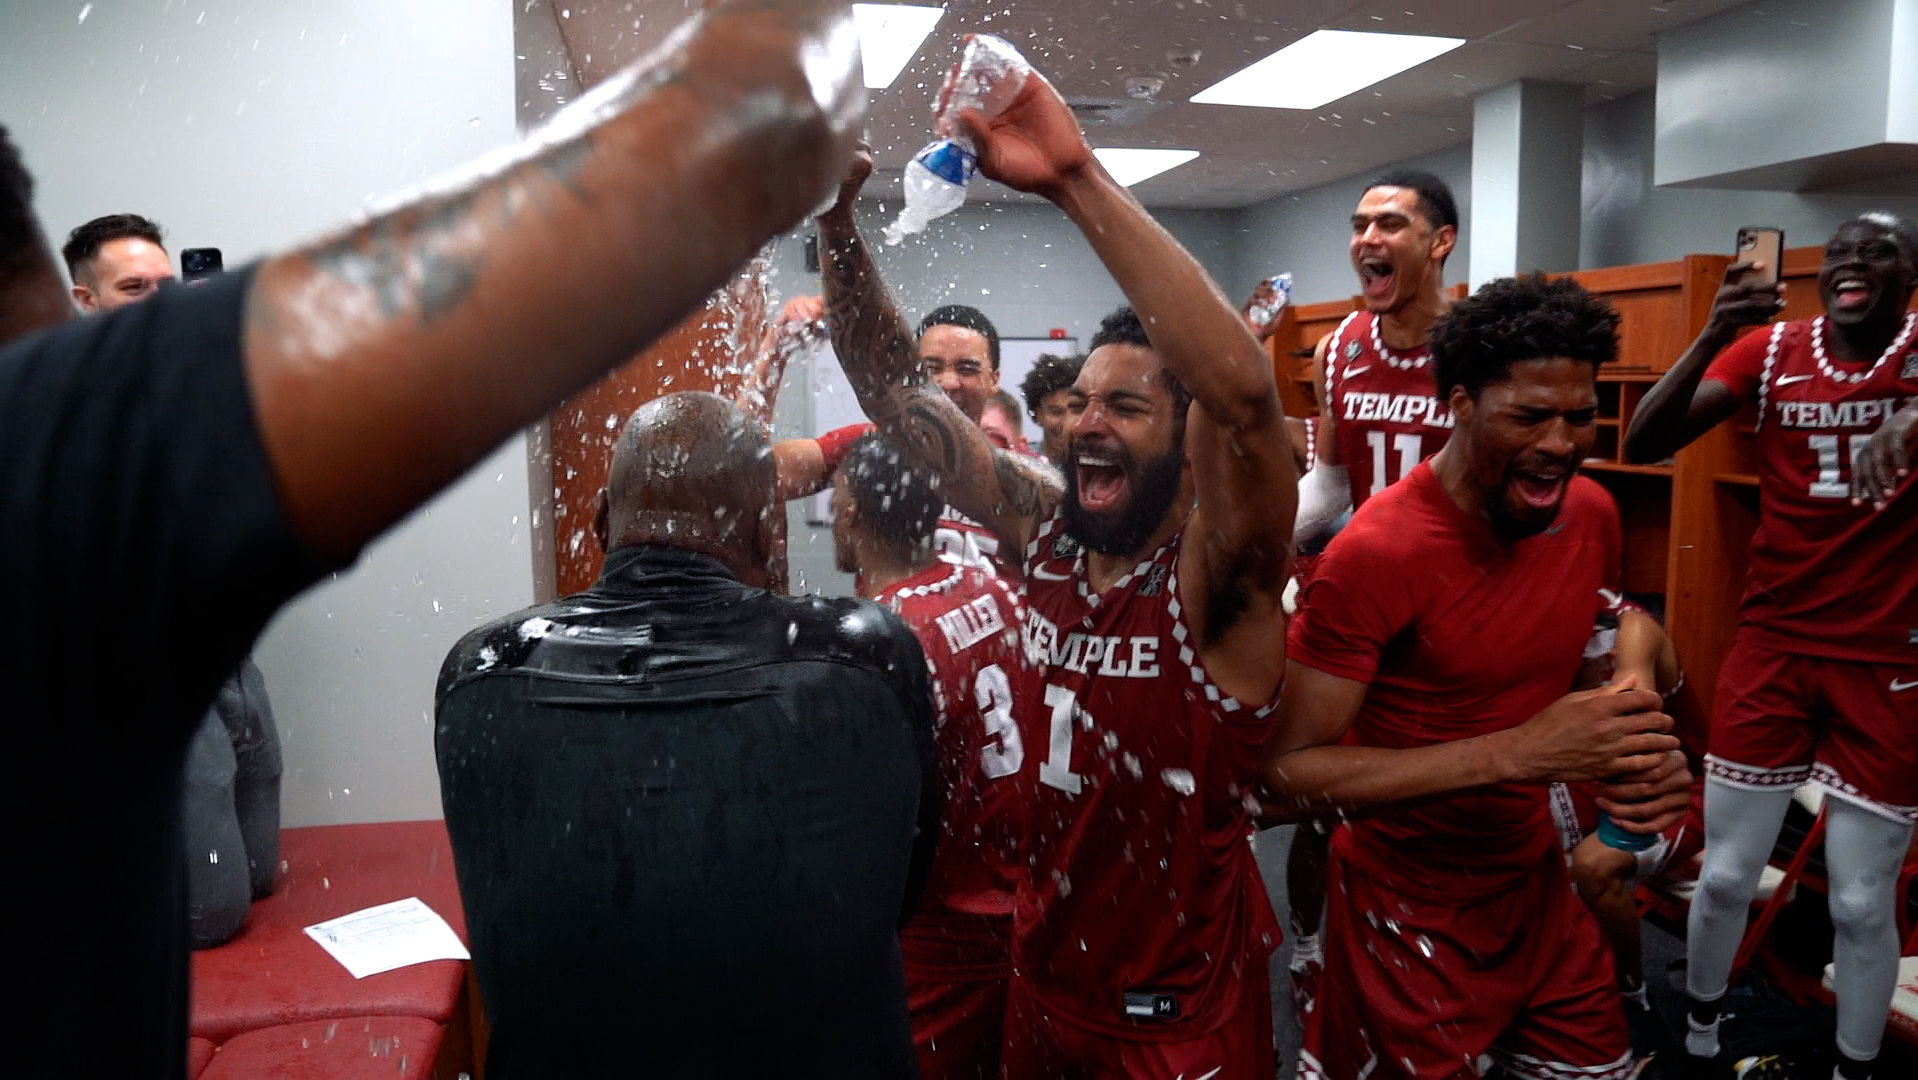 Temple basketball players wearing cherry and white jerseys, smiling brightly douse water on a coach inside the team locker room.